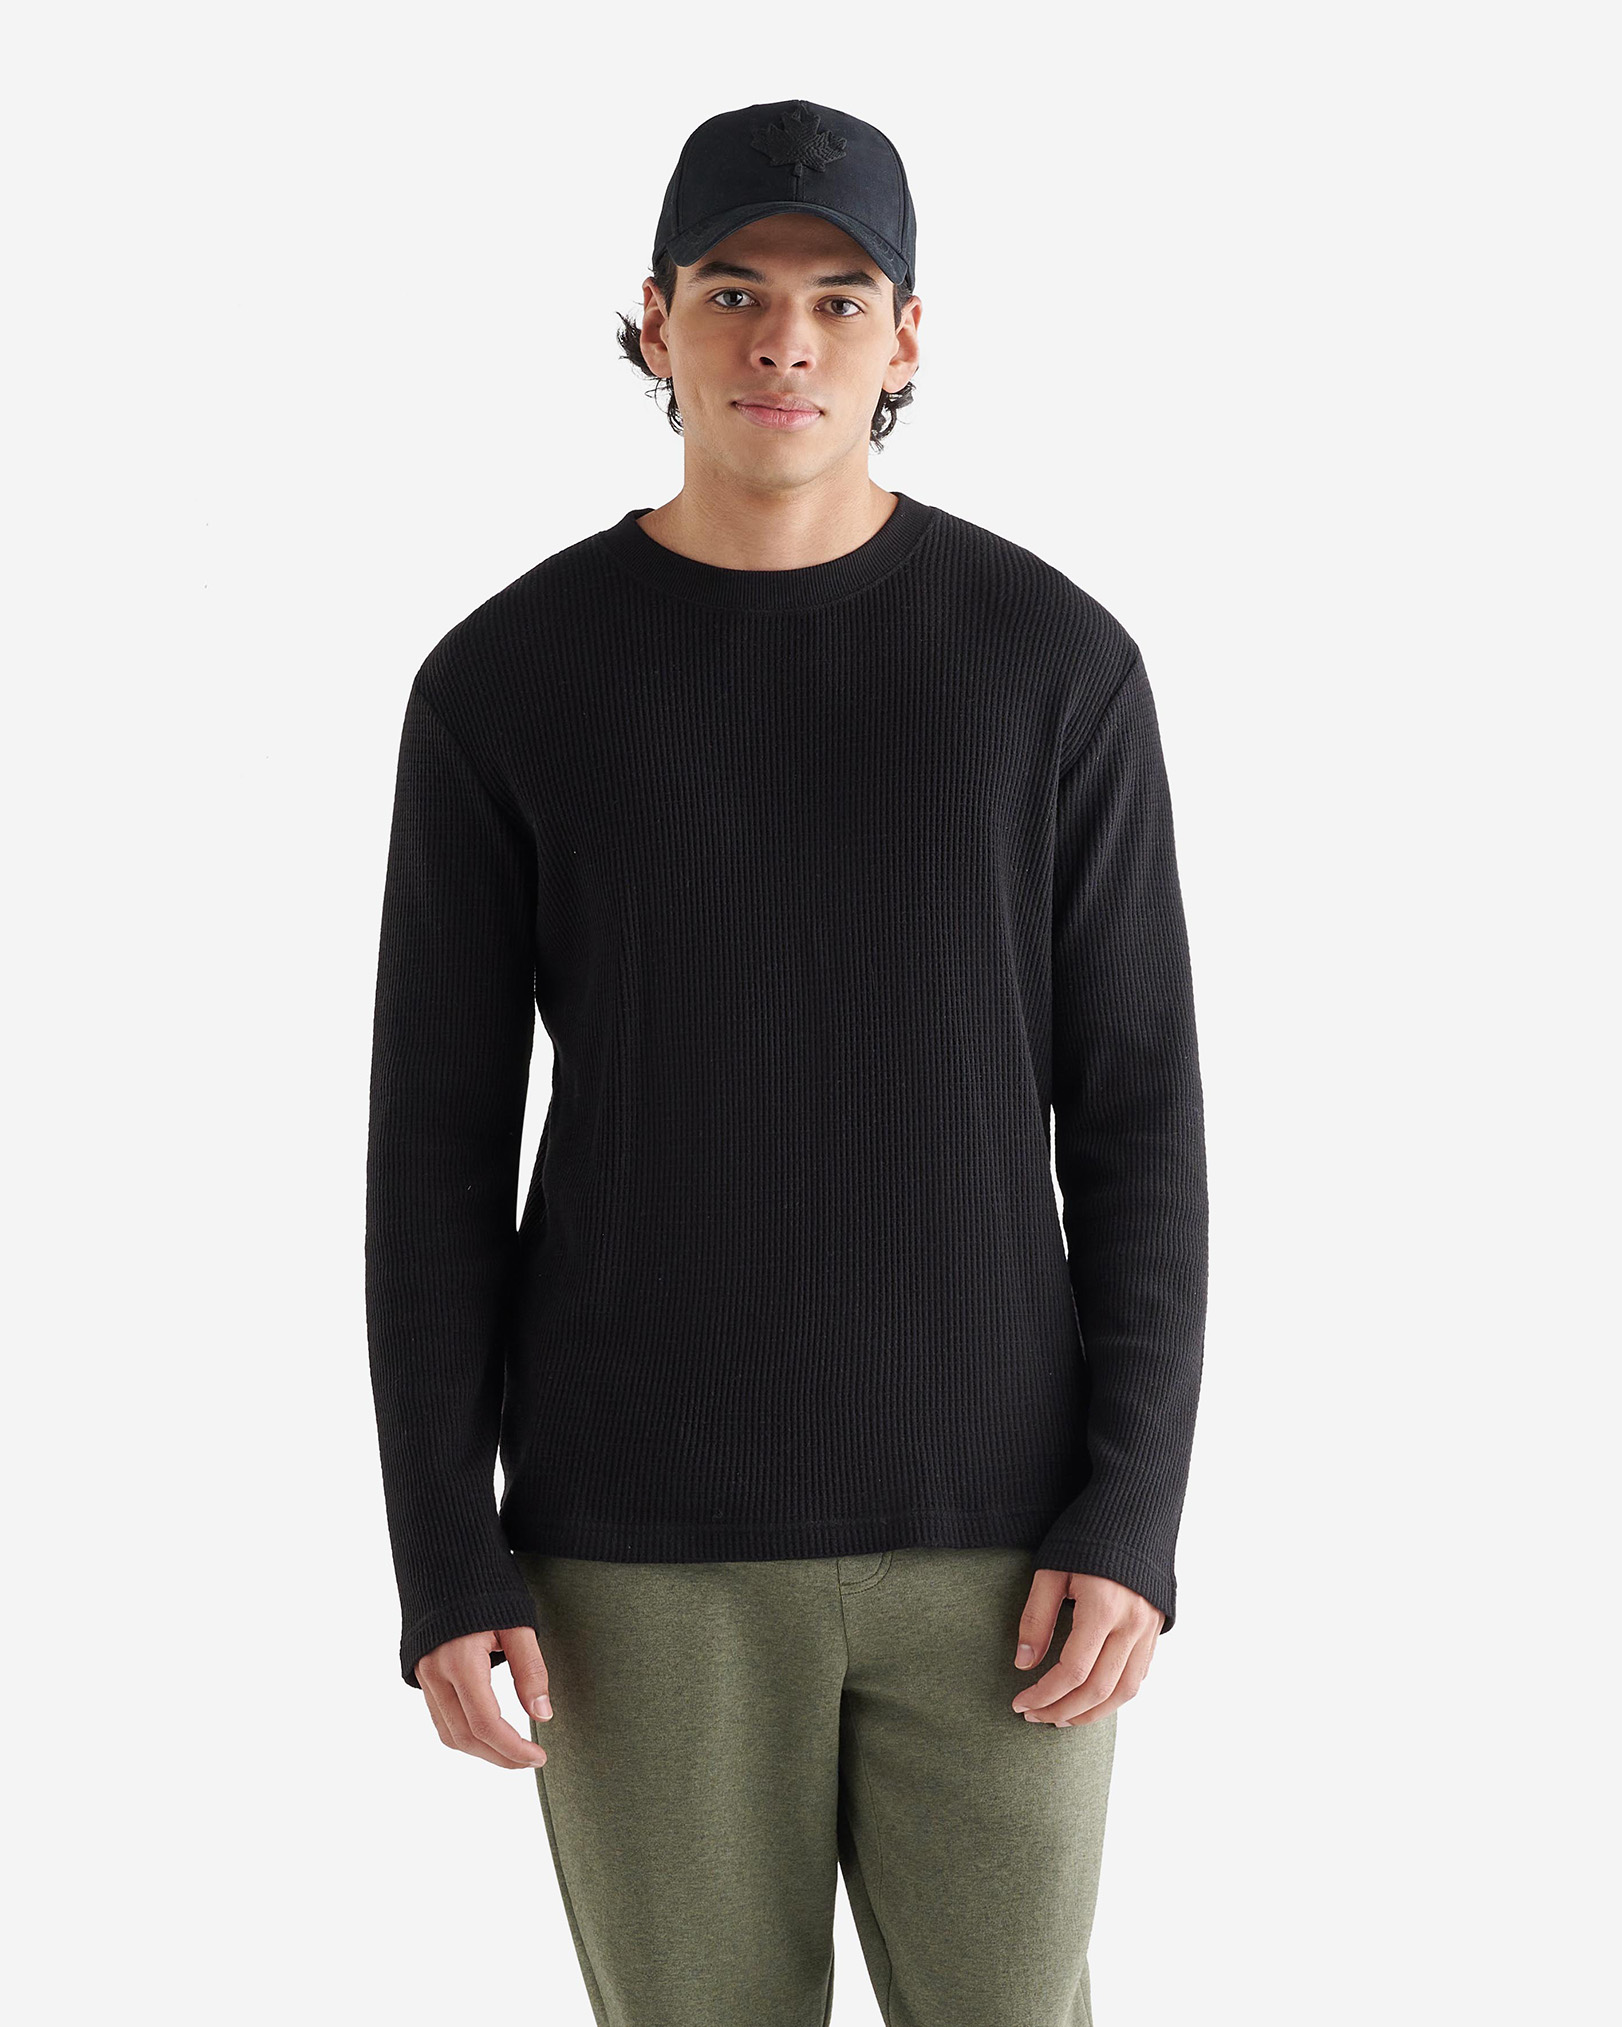 Roots Waffle Long Sleeve Crew Top in Black